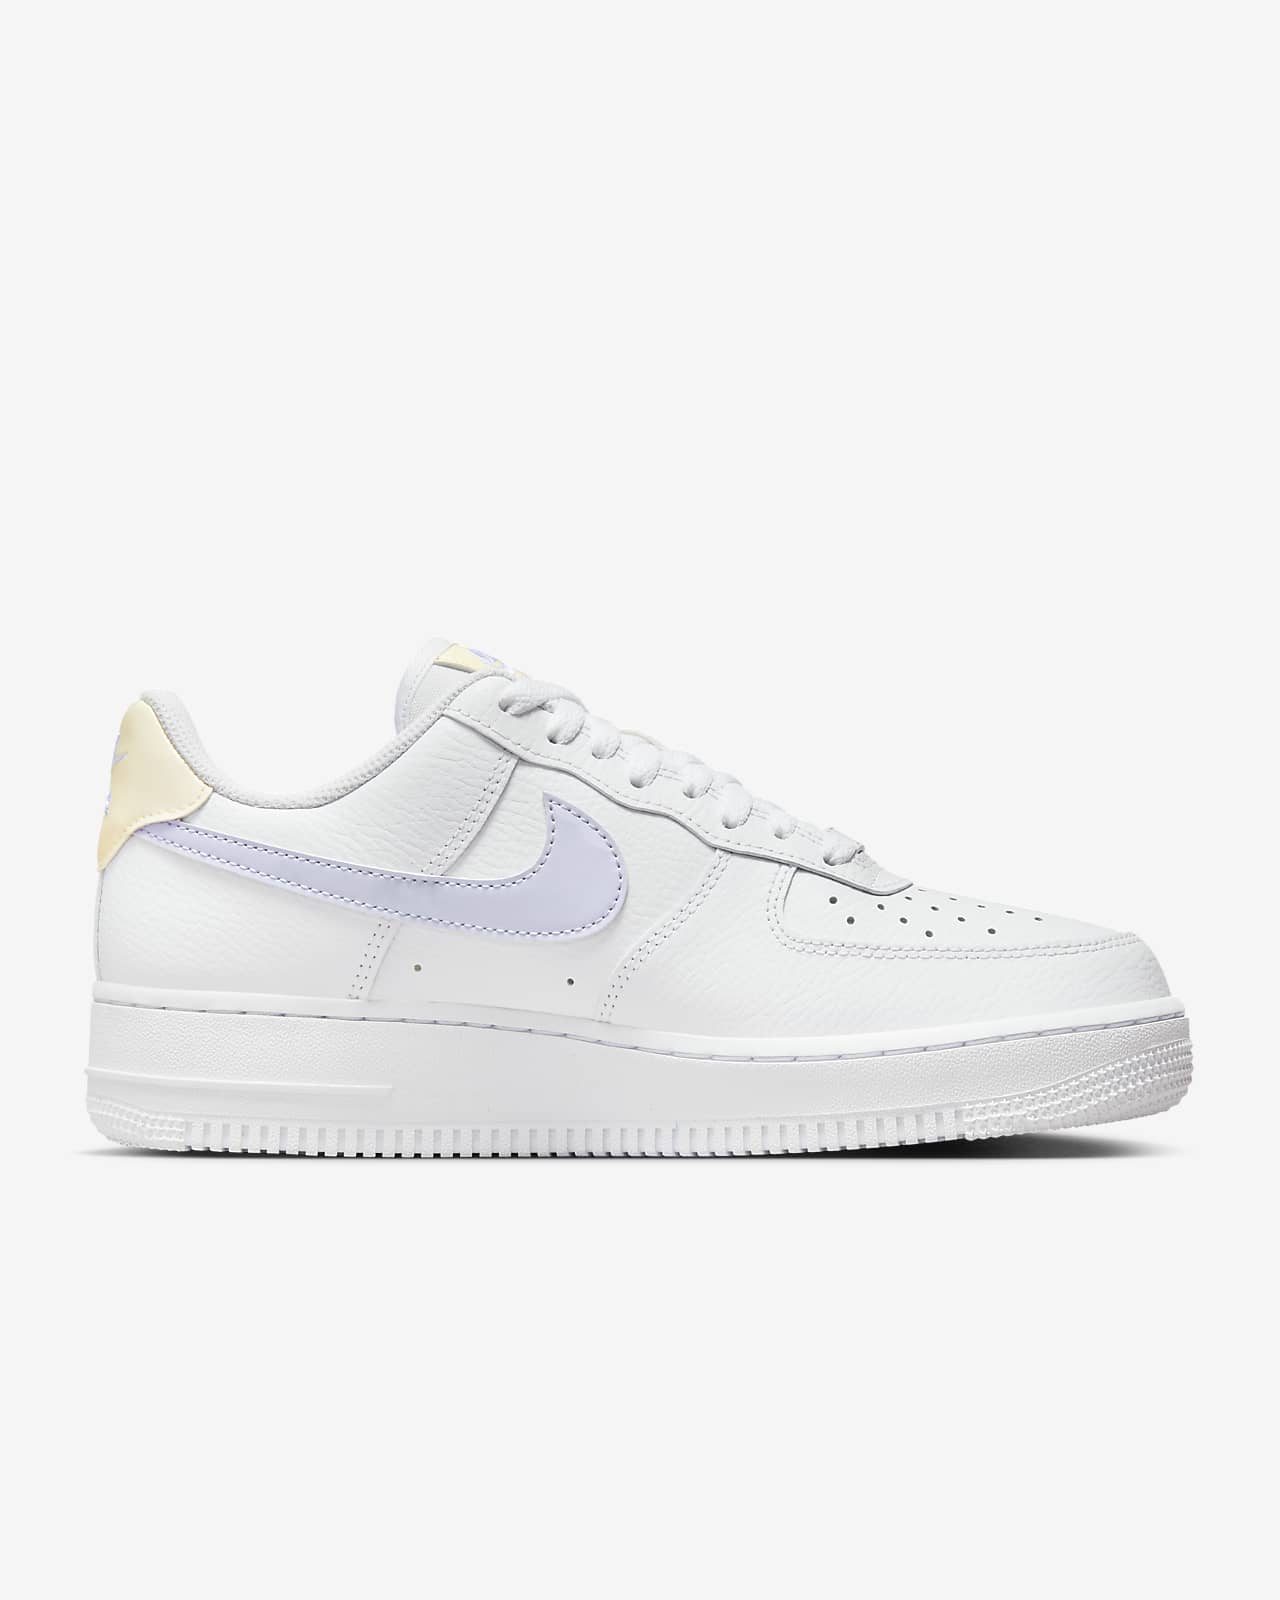 Nike Air Force 1 '07 Shoes. IL